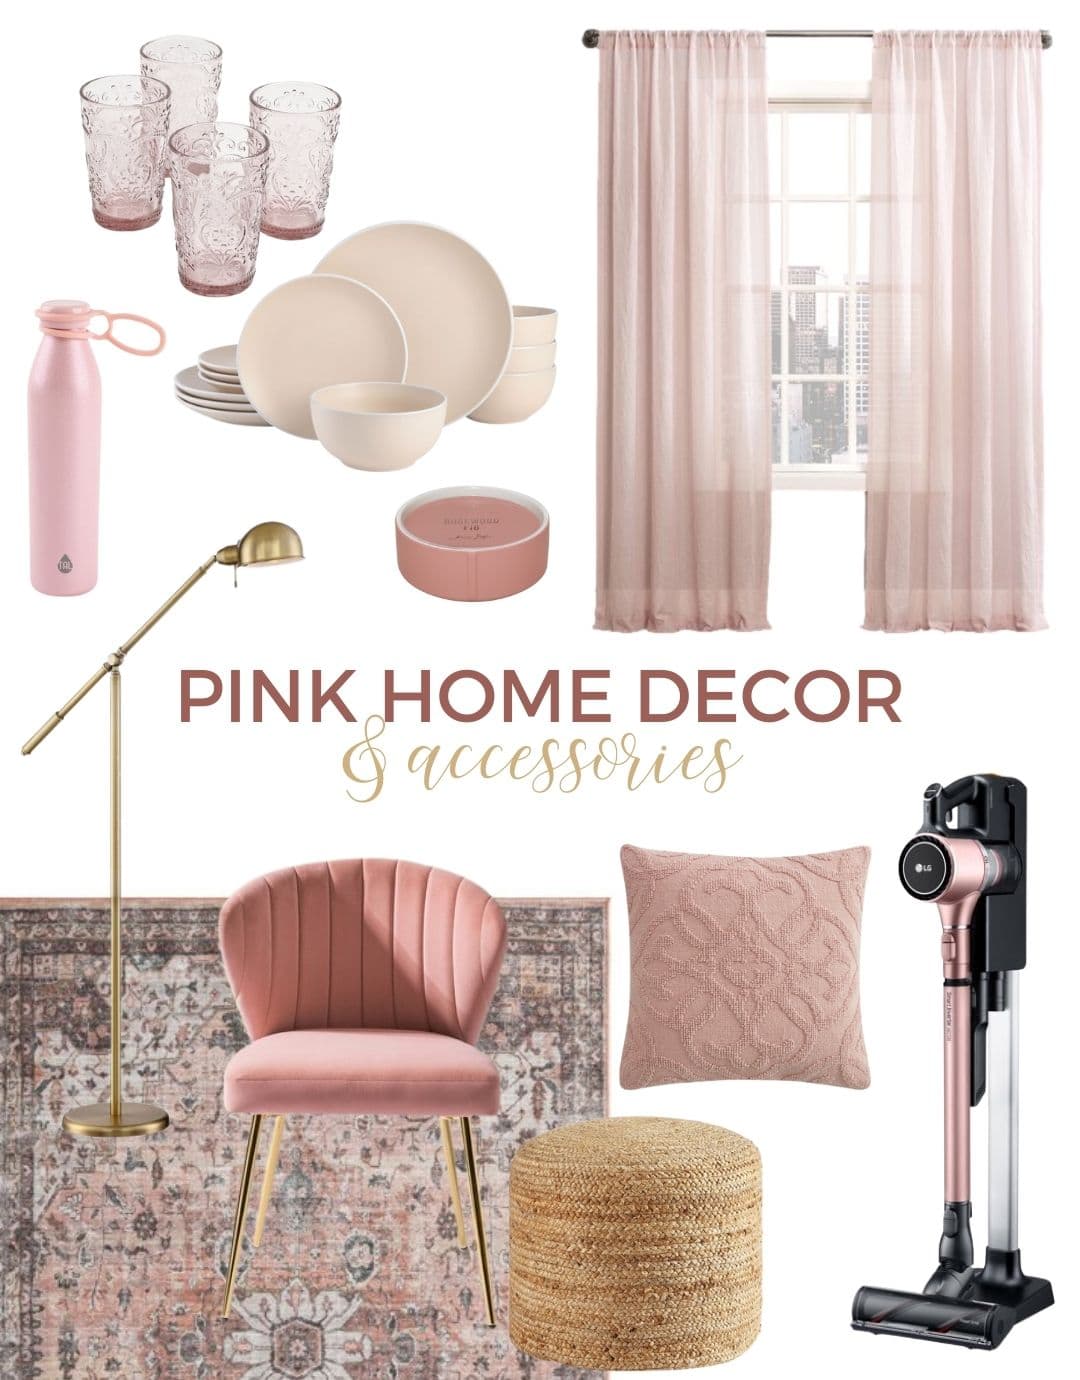 Pretty Pink Home Decor - The Turquoise Home